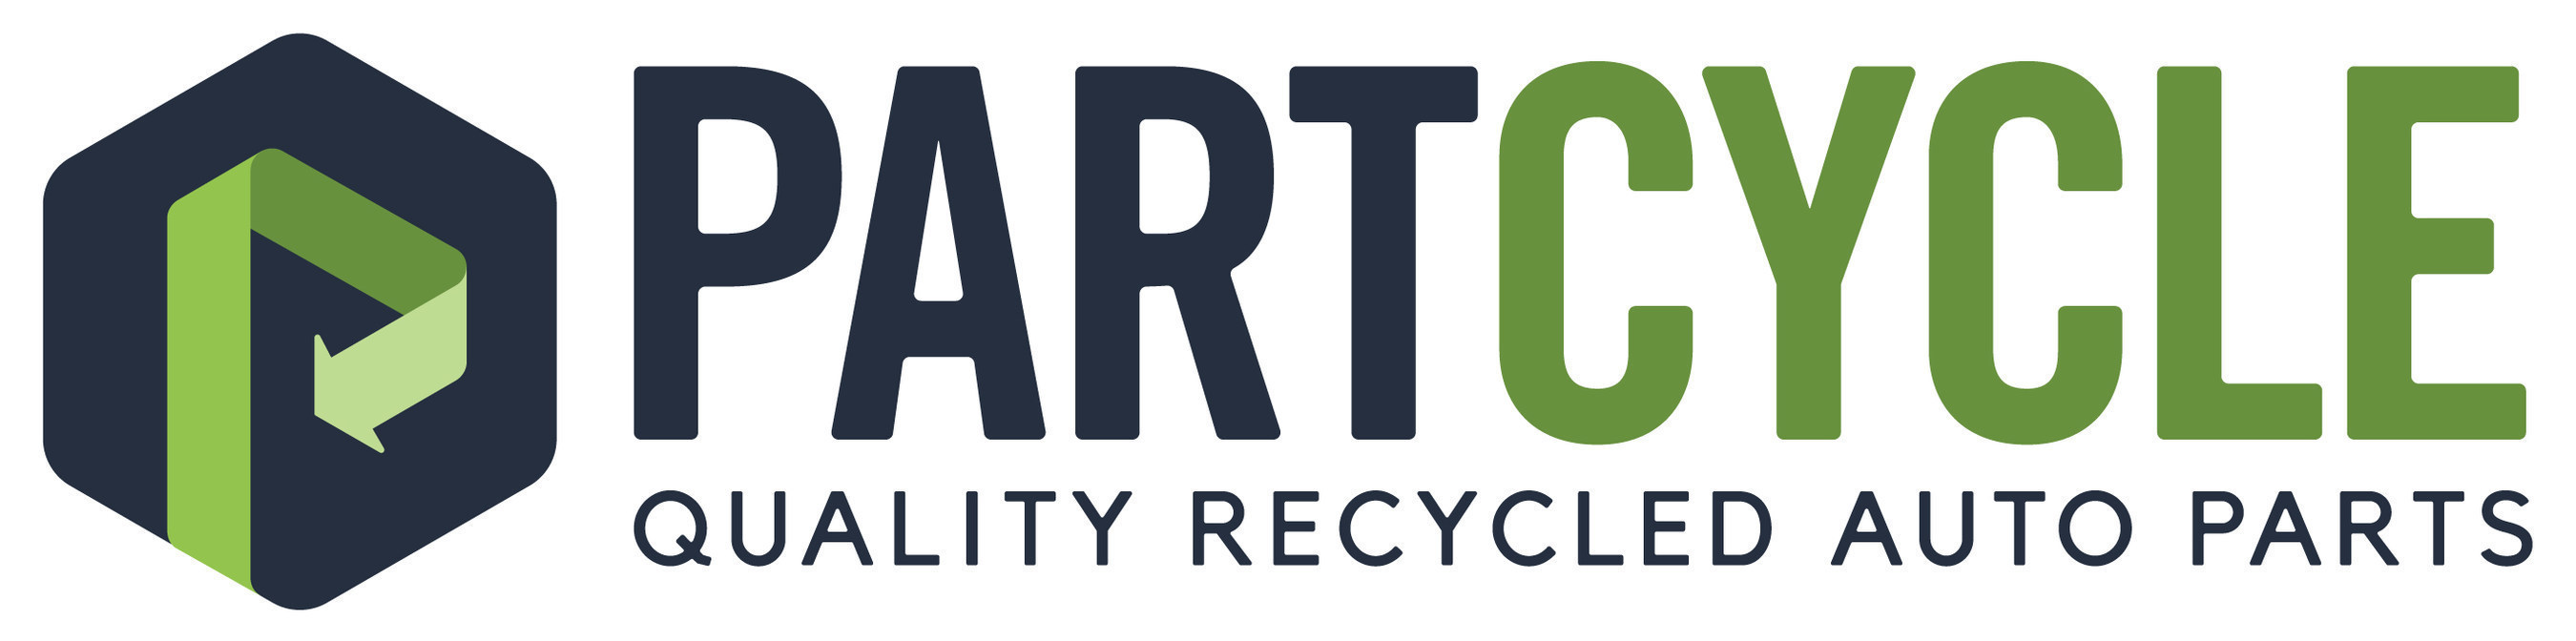 PartCycle Marketplace: e-commerce solution for sourcing quality recycled auto parts from professional automotive recyclers you can trust.